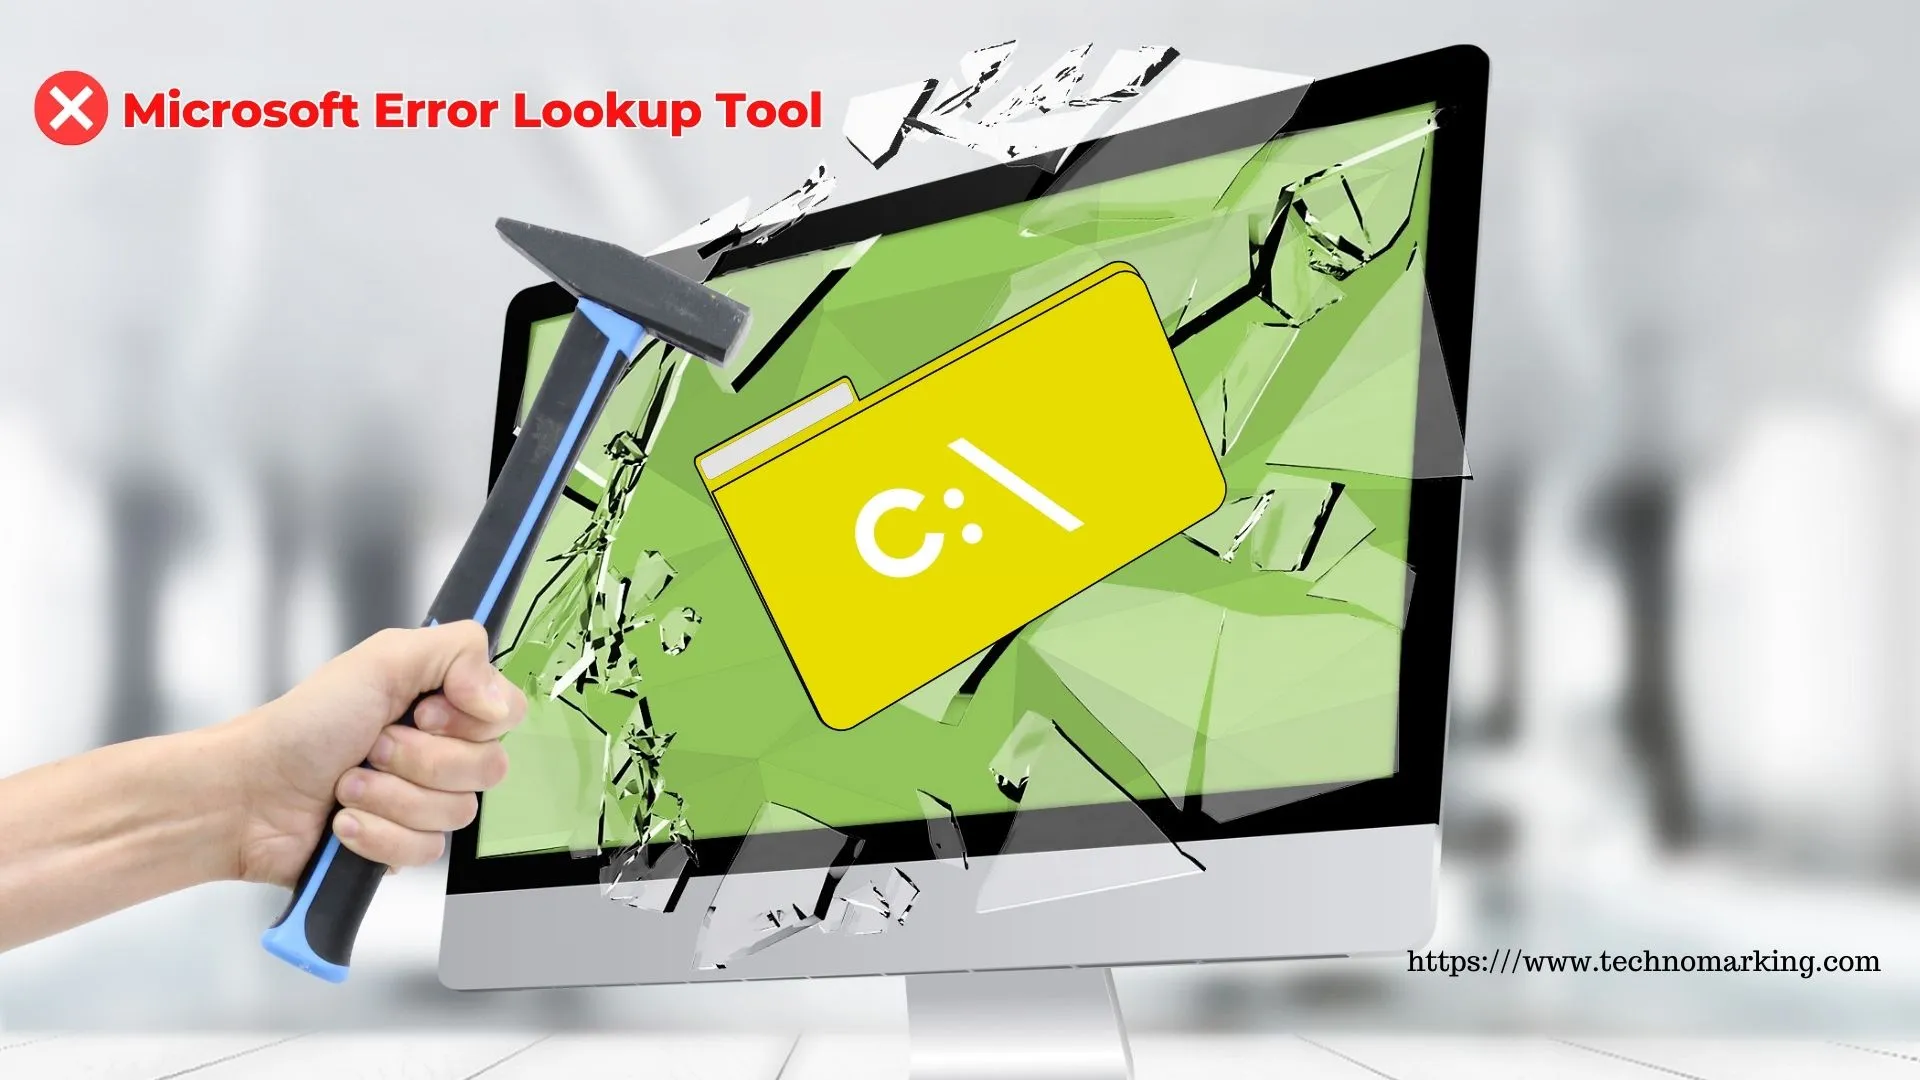 Stop struggling with Windows errors. Discover how Microsoft Error Lookup Tool can help you understand and fix Windows errors easily. Download now and troubleshoot with confidence.